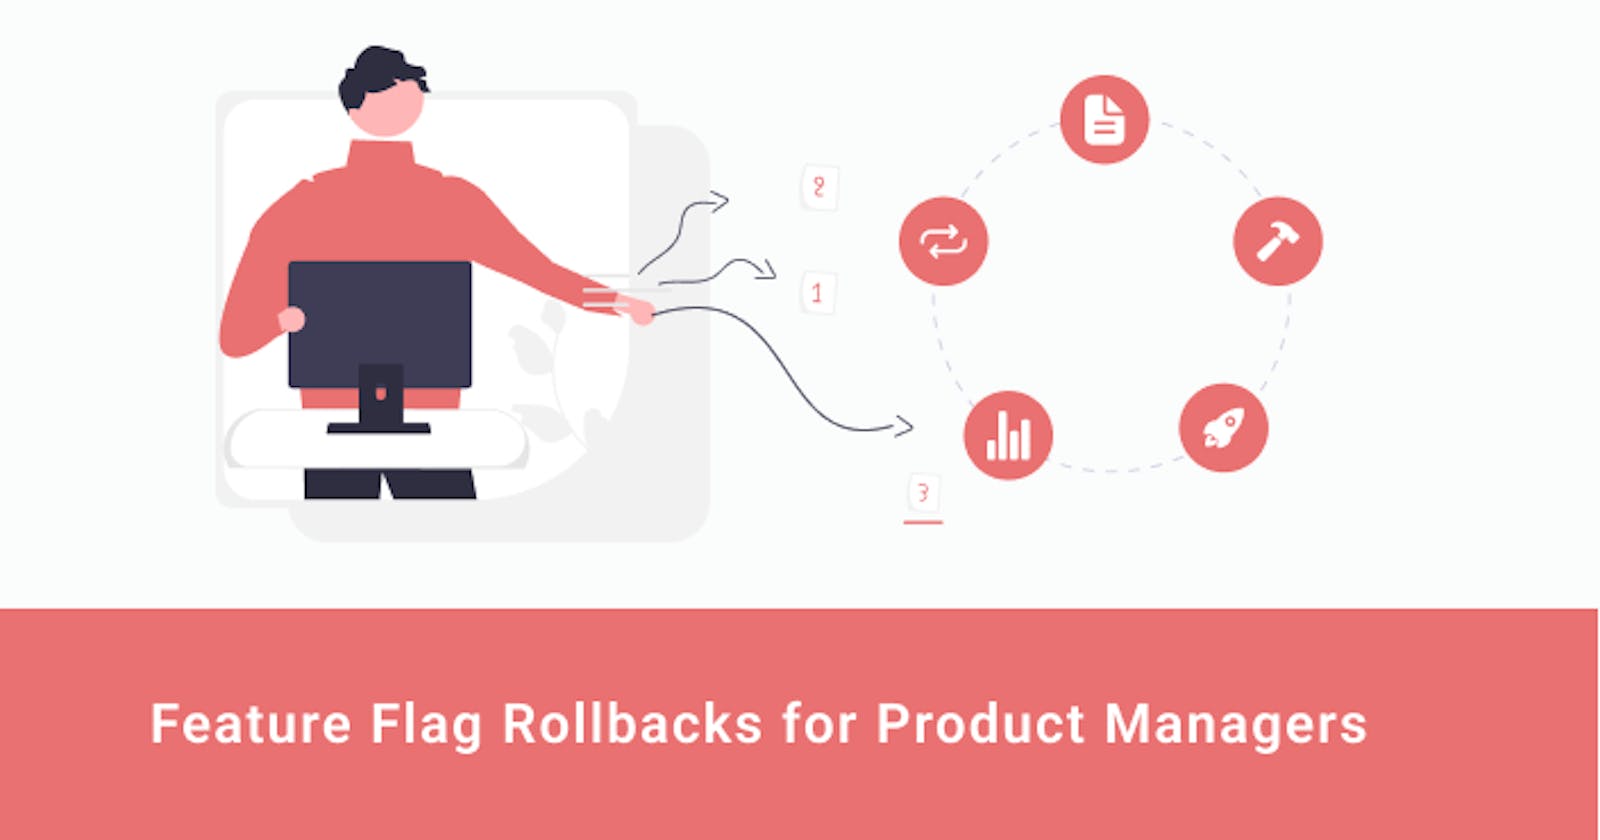 Feature Flag Rollbacks for Product Managers